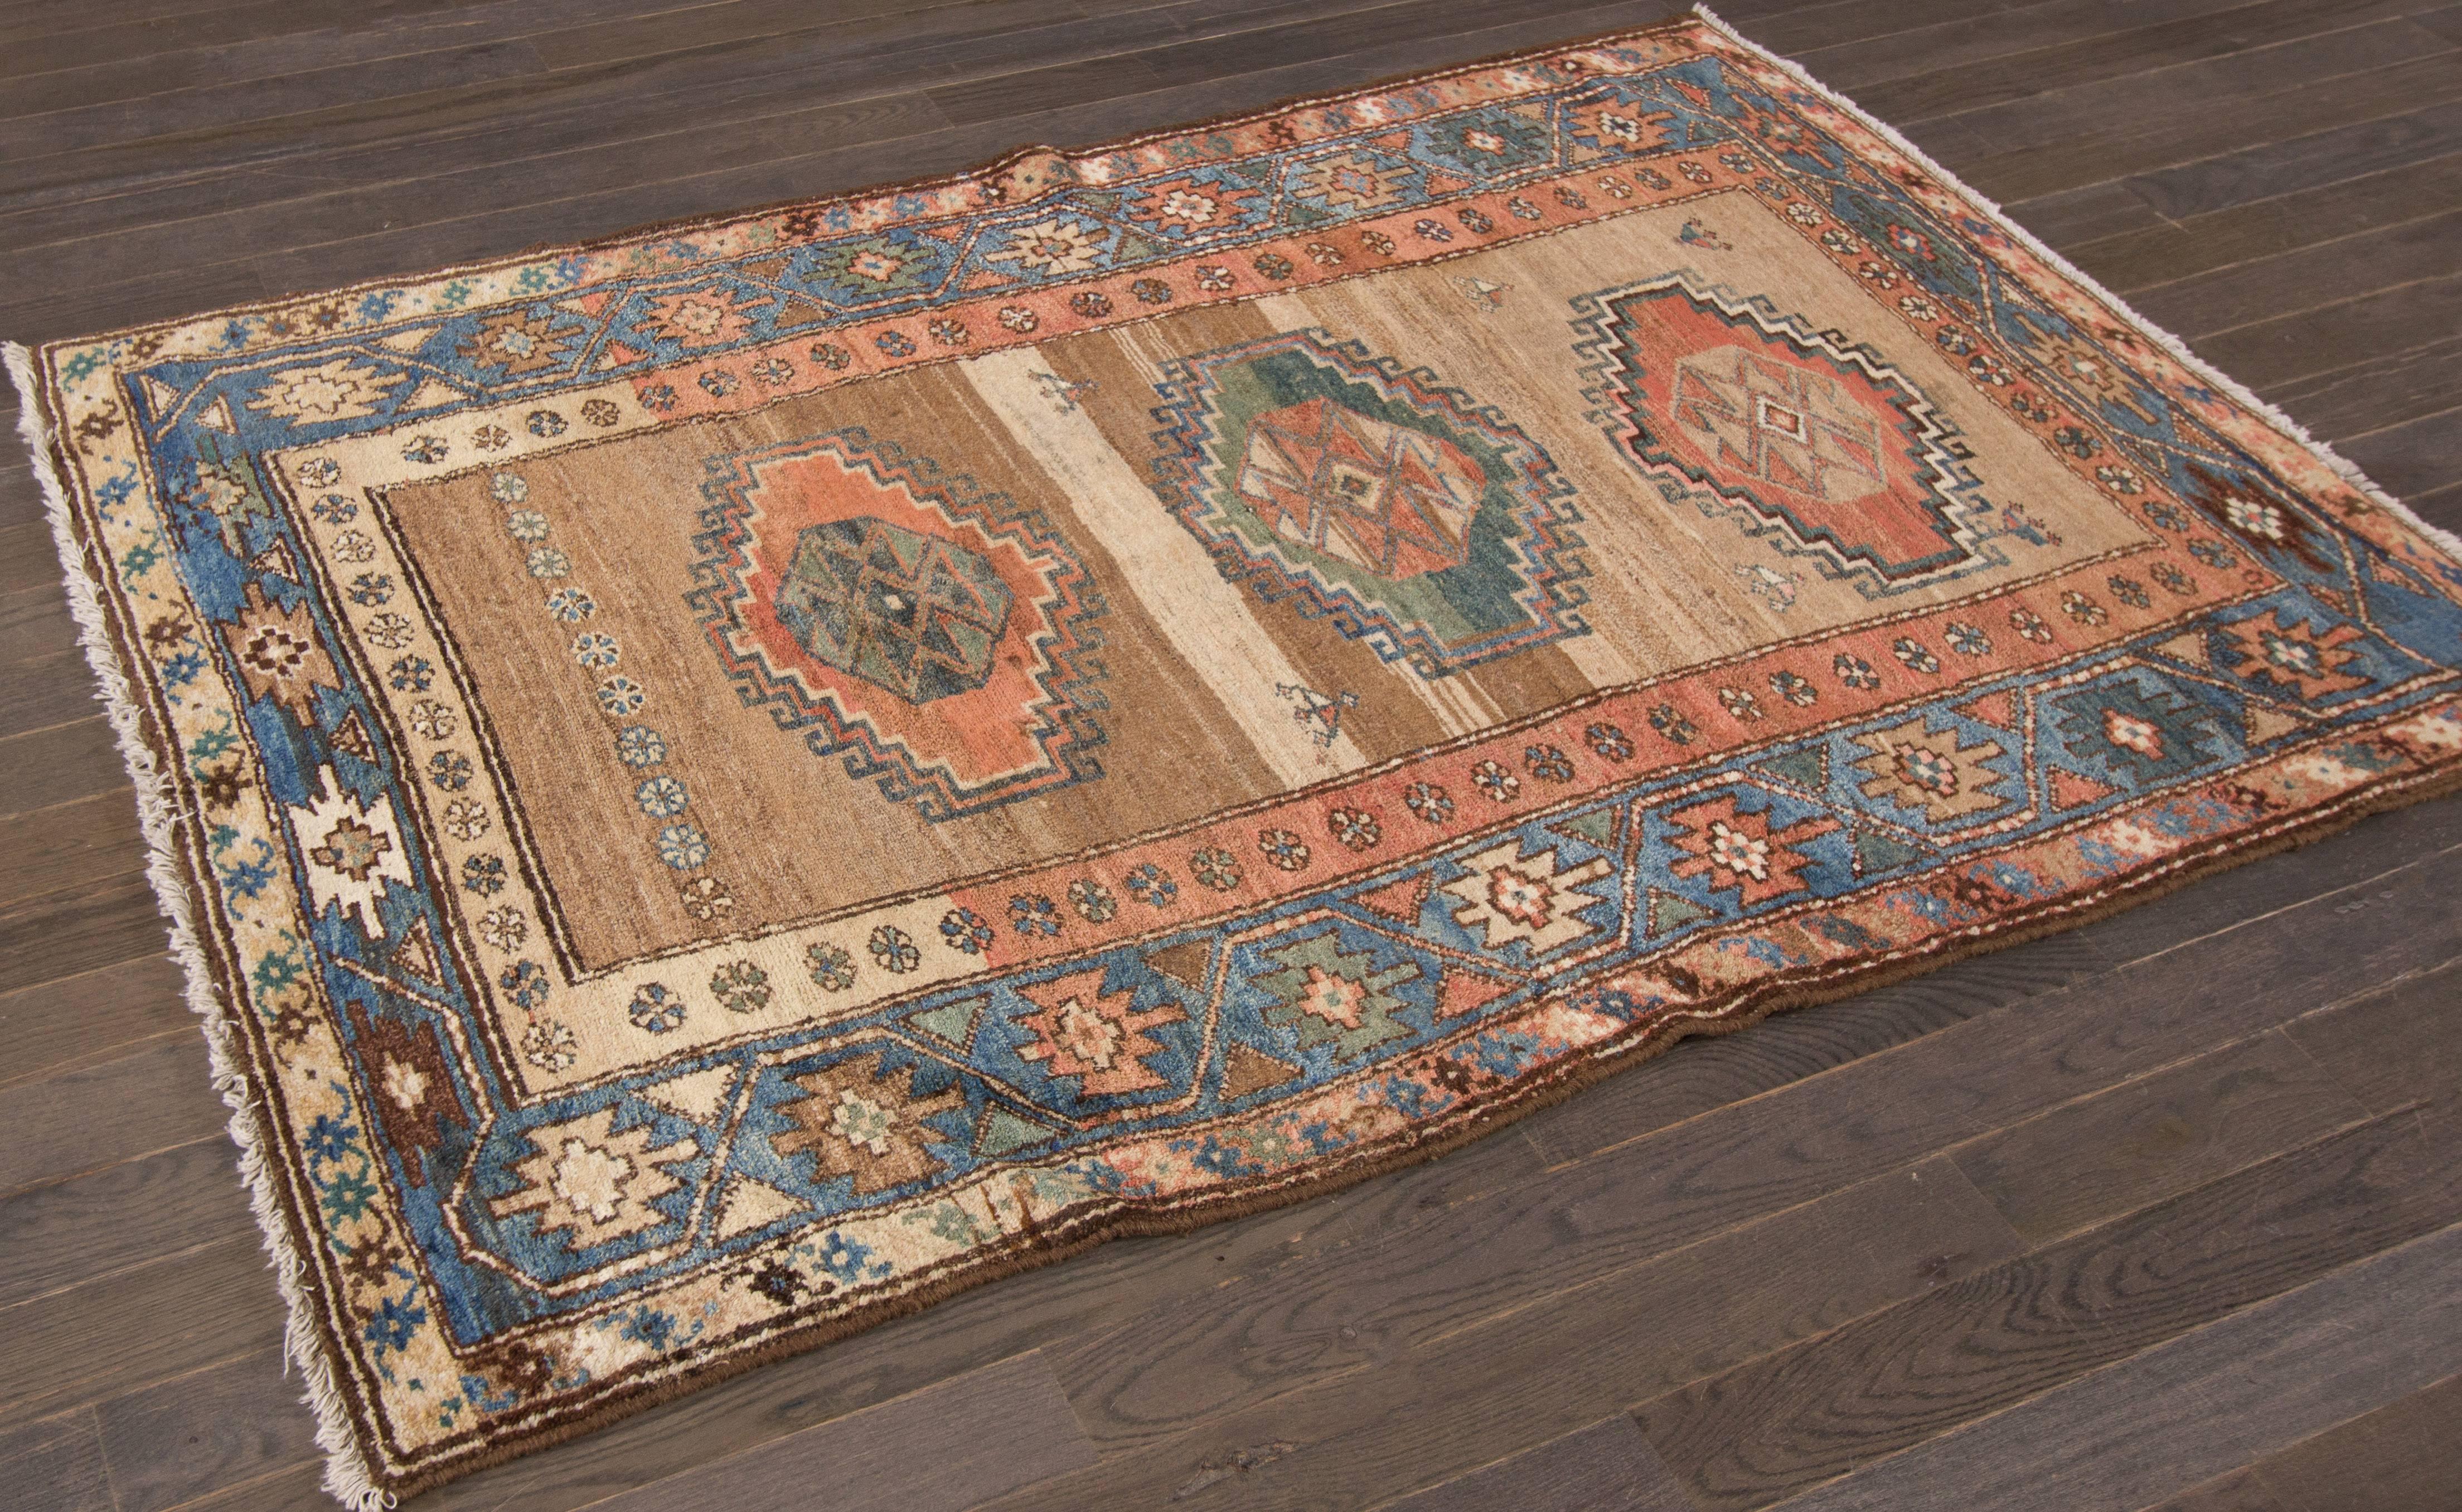 5'.A hand-knotted Camelhair Kurd rug with a geometric design on a beige field. Accents of blue, red and ivory throughout the piece. This rug measures 3'.10 x 5'.8.